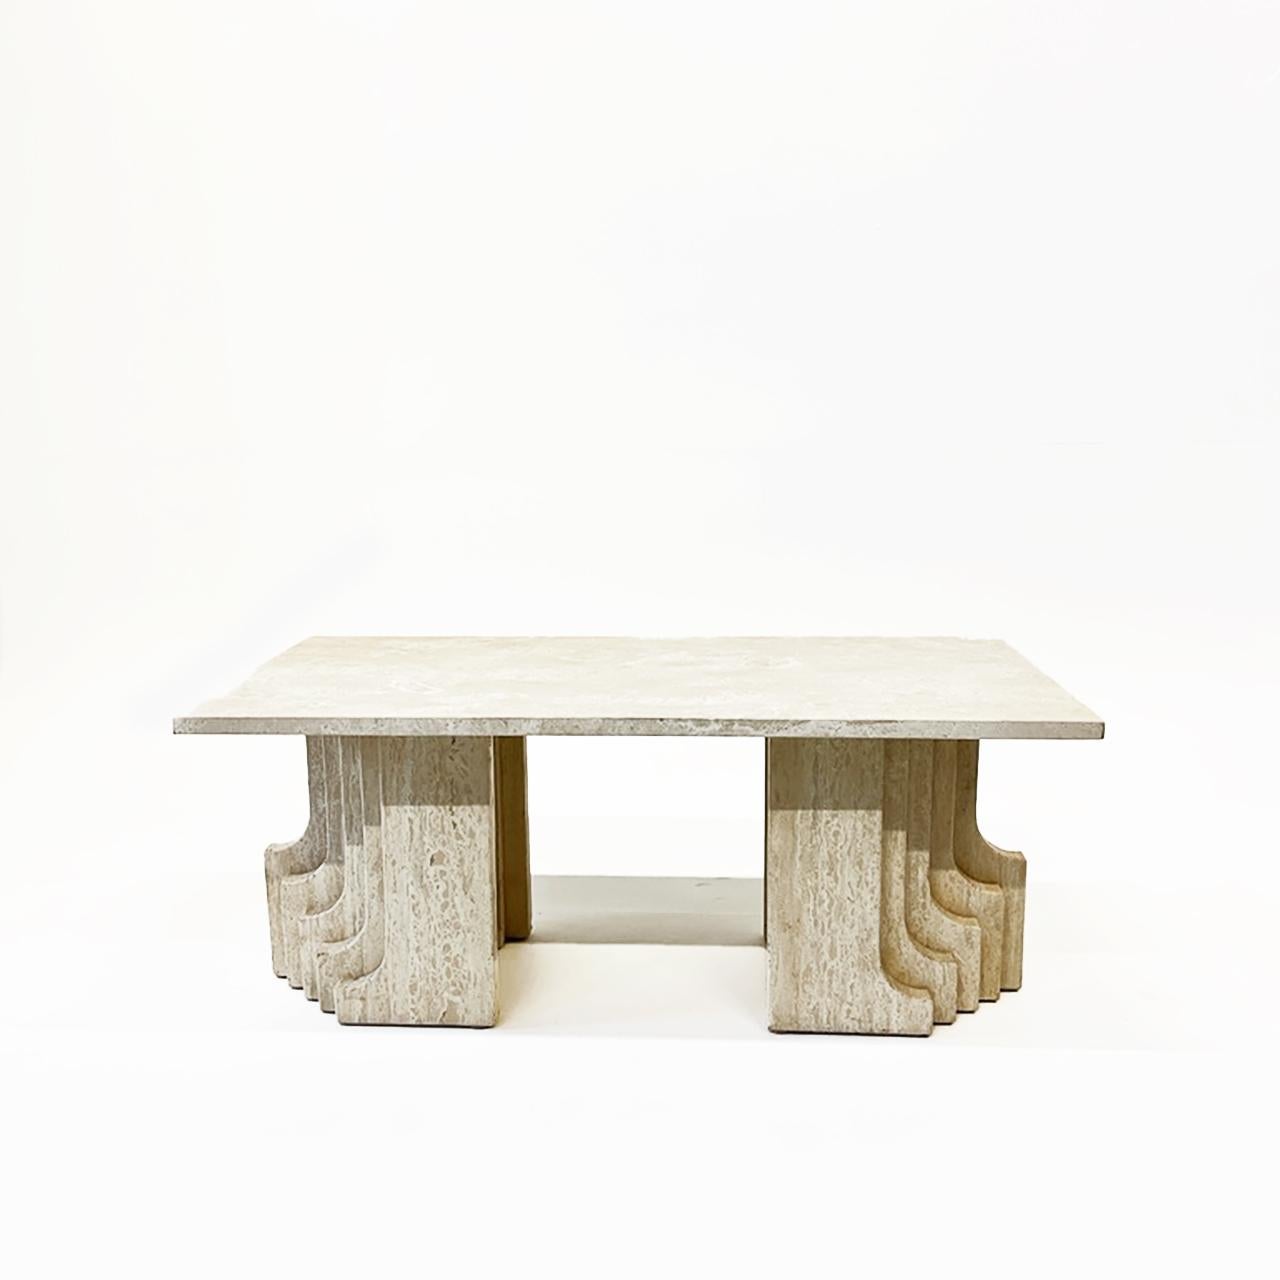 Anchored by two robust, sculptural blocks of travertine. Exhibiting raw textures and subtle tonal nuances, the travertine blocks are reminiscent of the iconic Brutalist aesthetic, with organic sense of movement. The creamy hues of the travertine